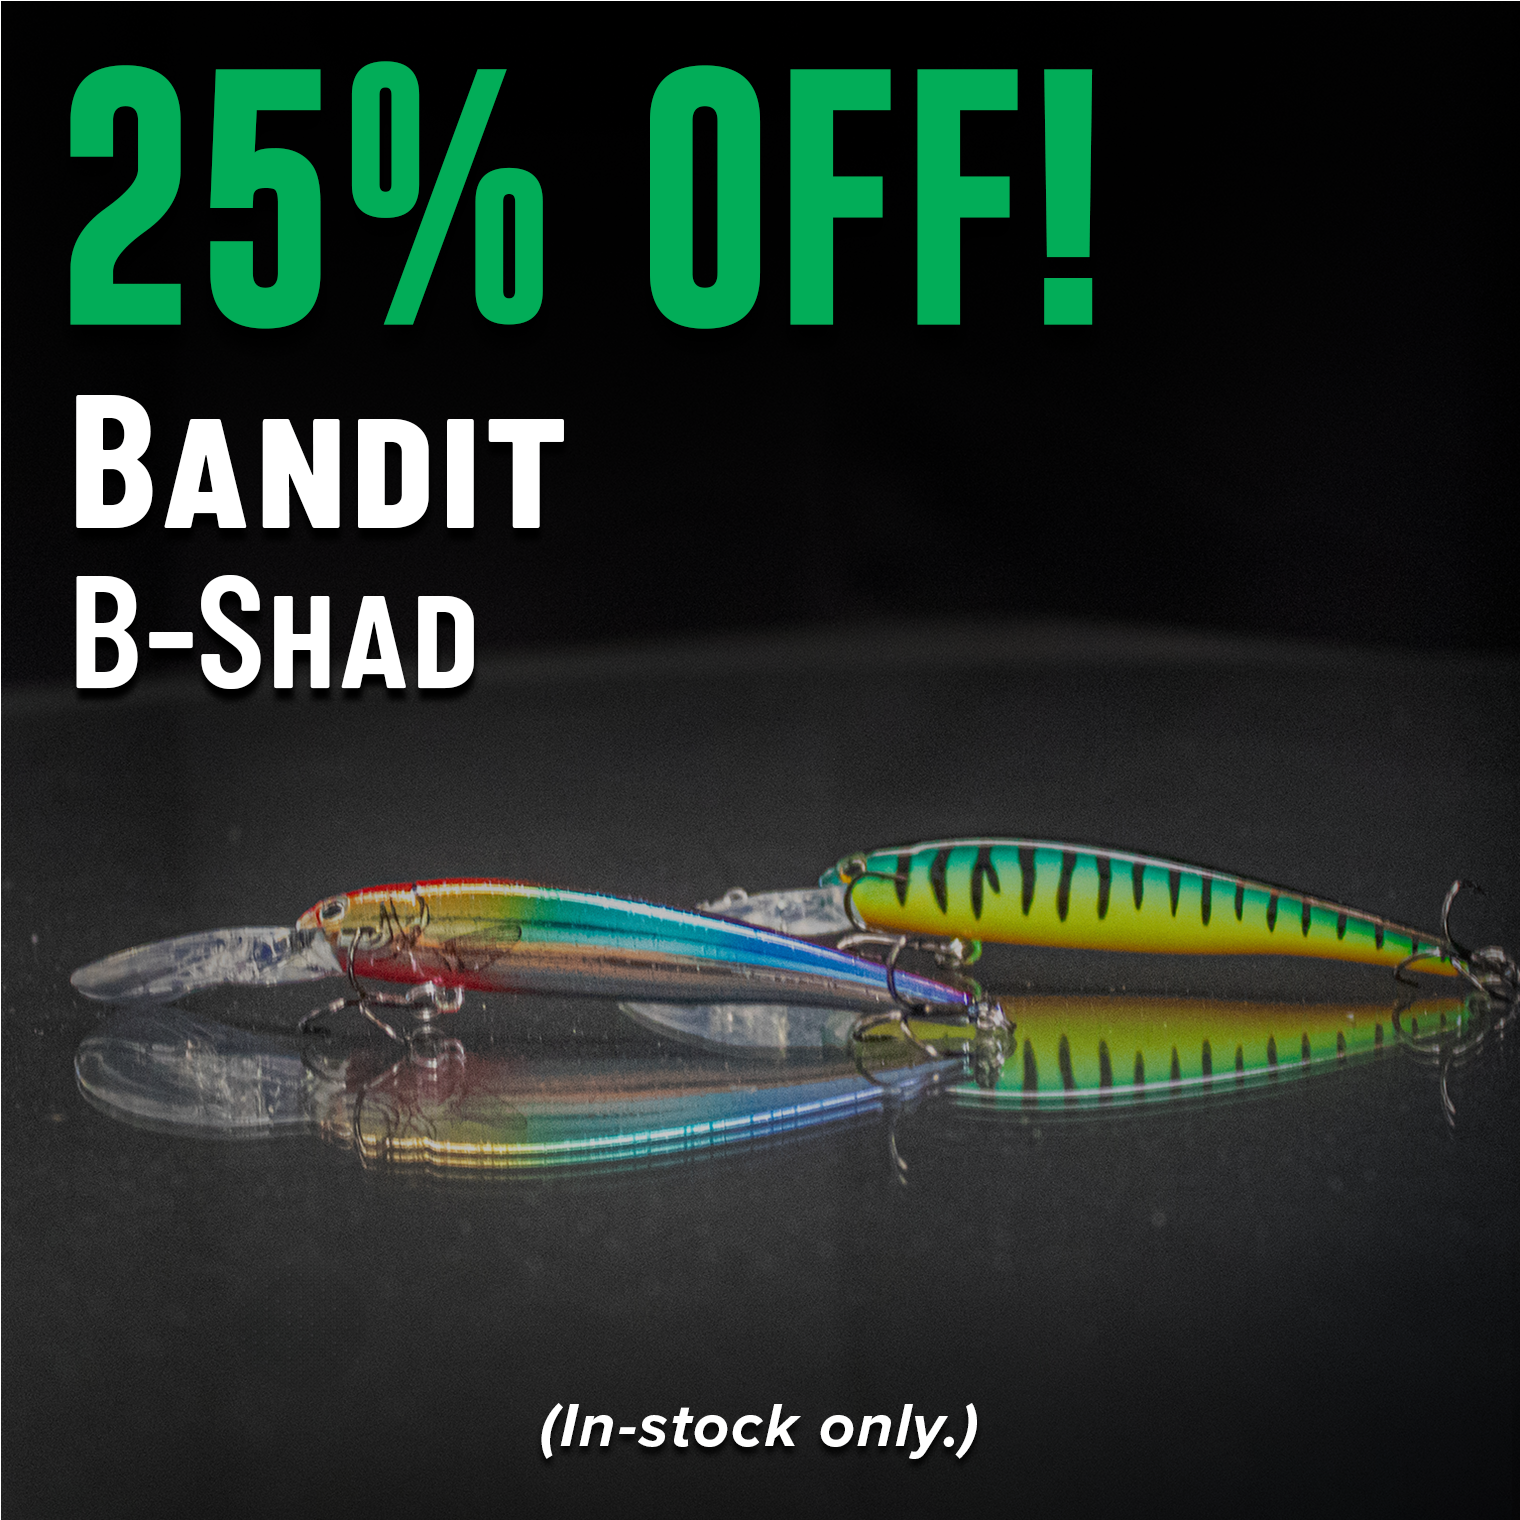 25% Off! Bandit B-Shad (In-Stock only.)